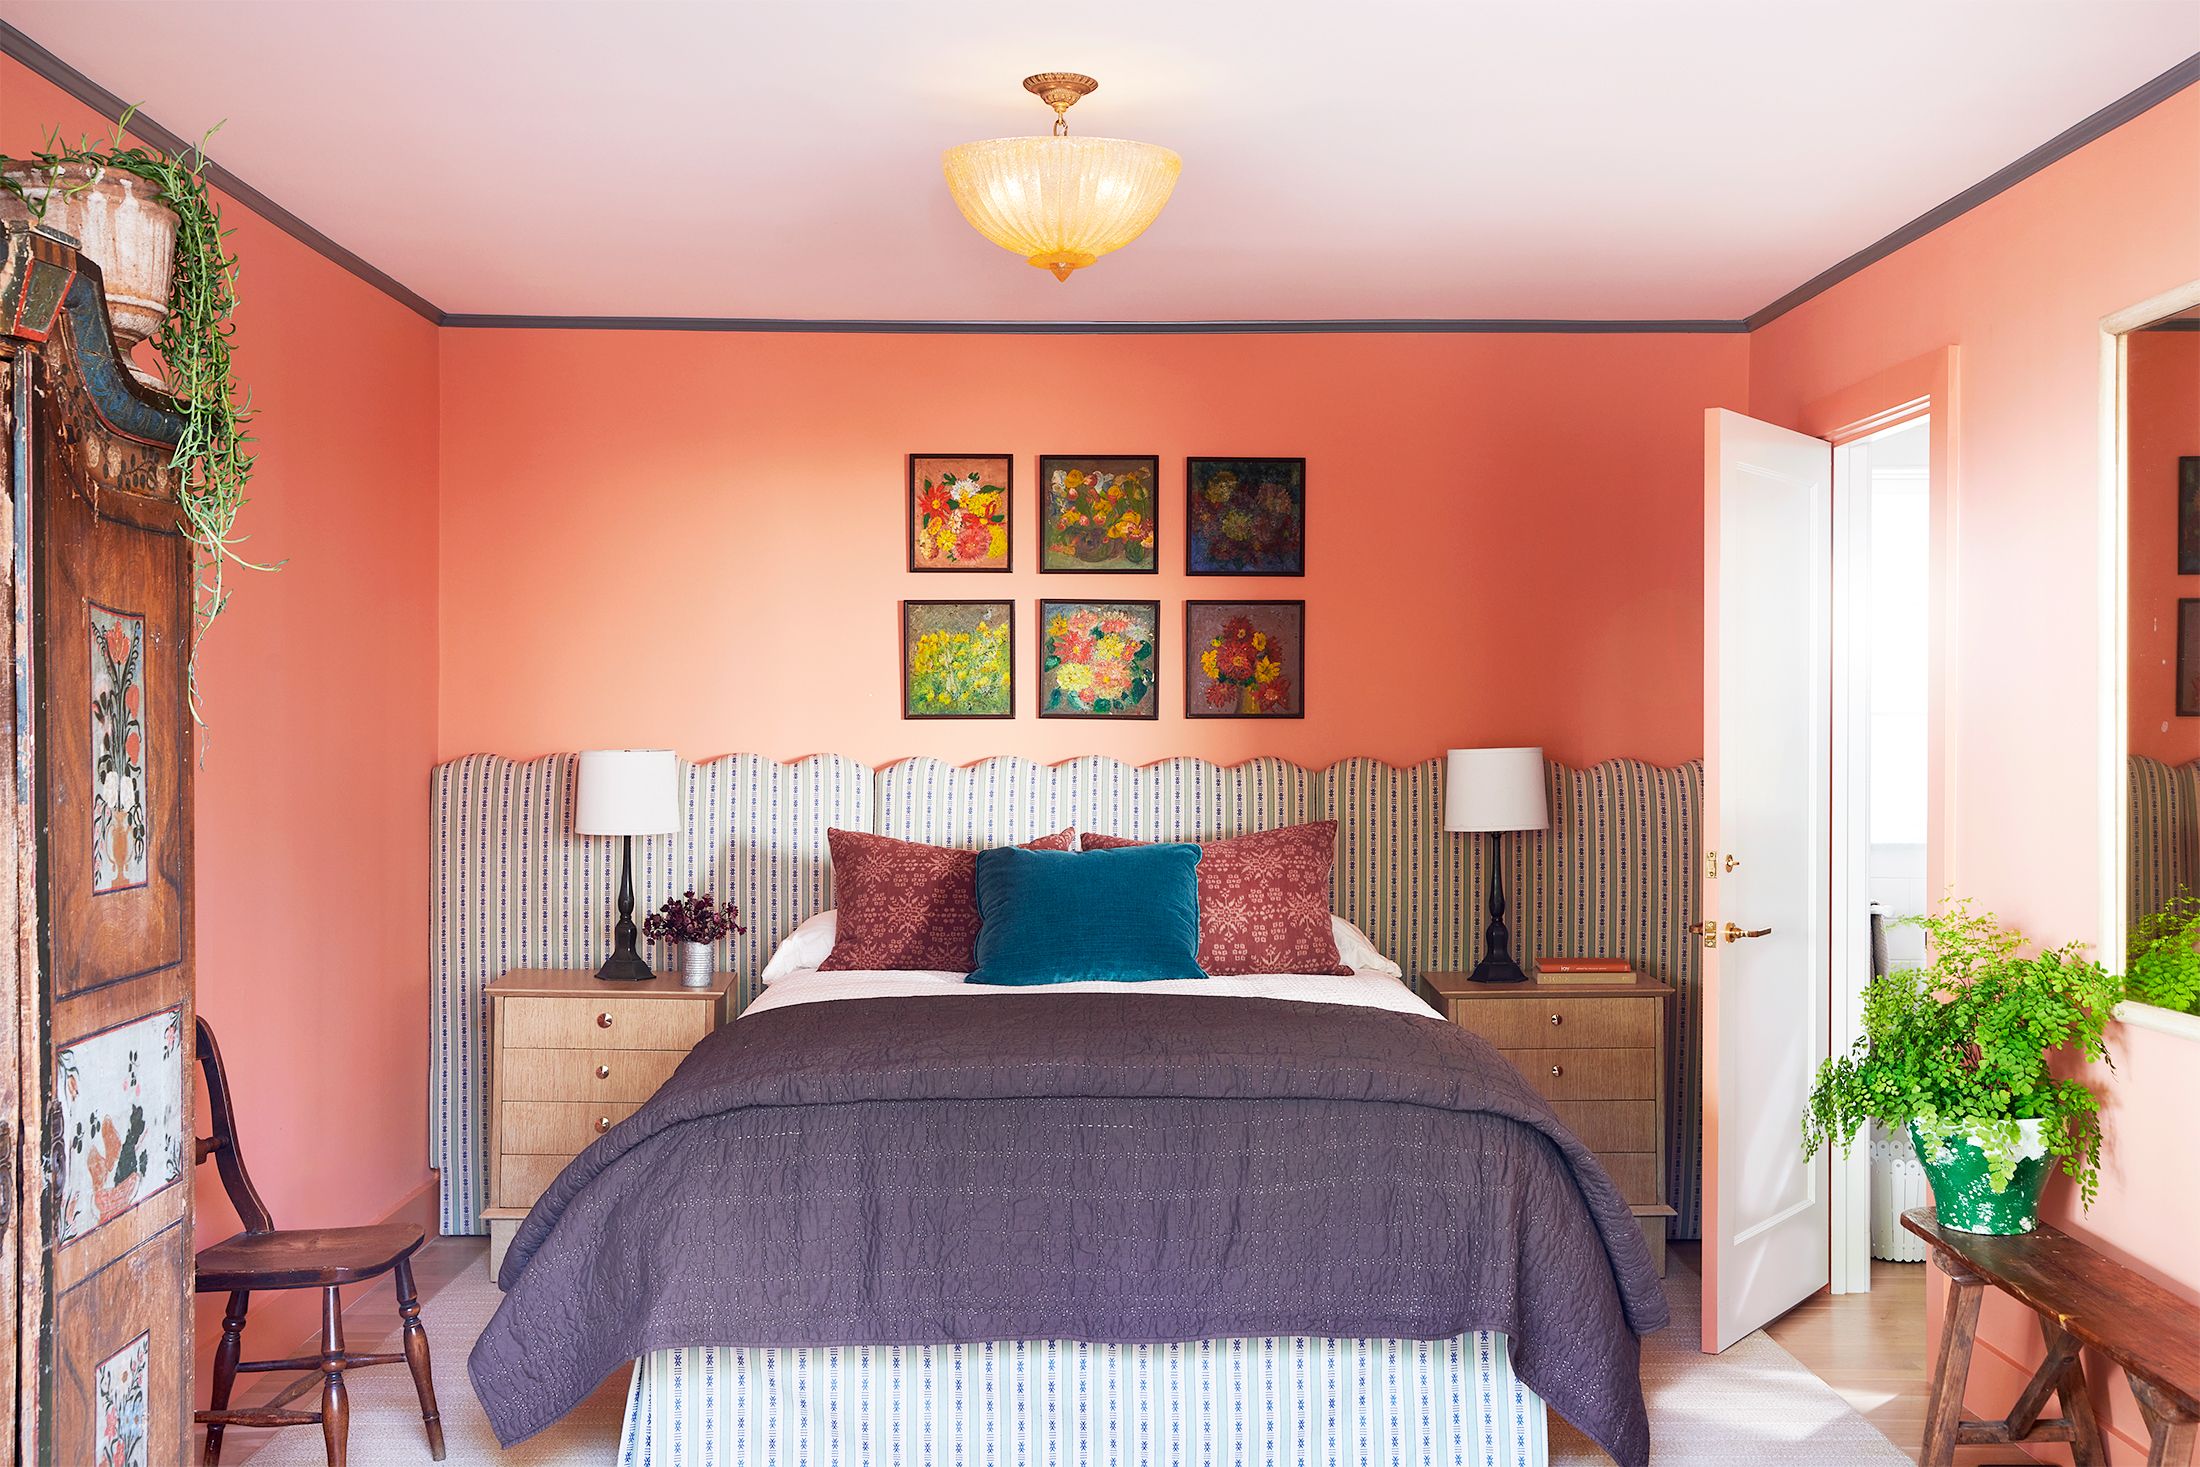 45 Best Bedroom Paint Colors 2023 - Color Ideas For Bedroom